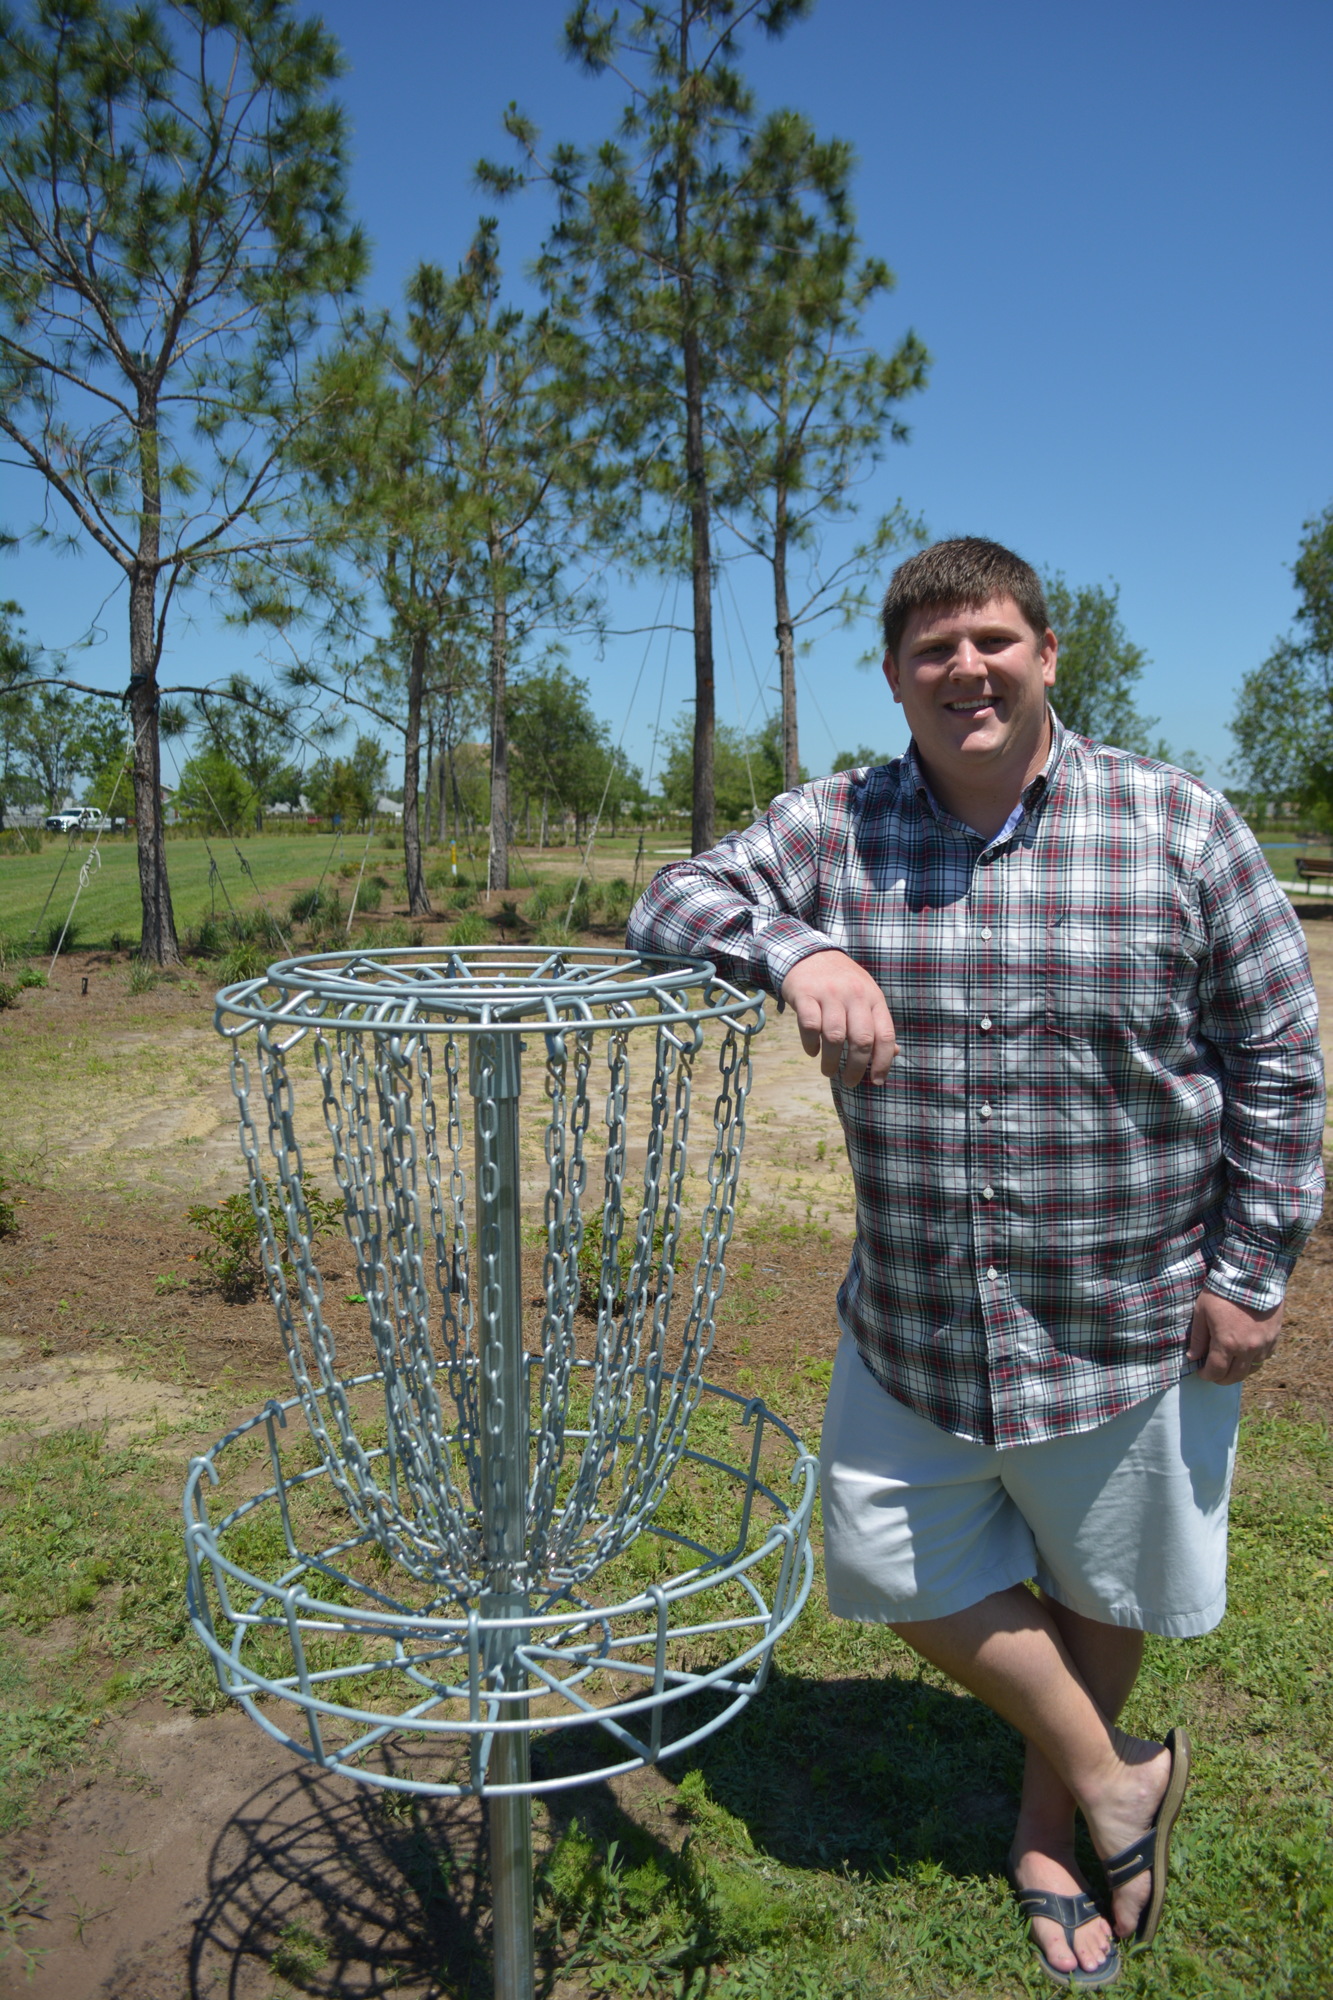 MVP Sports and Social Club founder Chris McComas will demonstrate disc golf at the celebration.